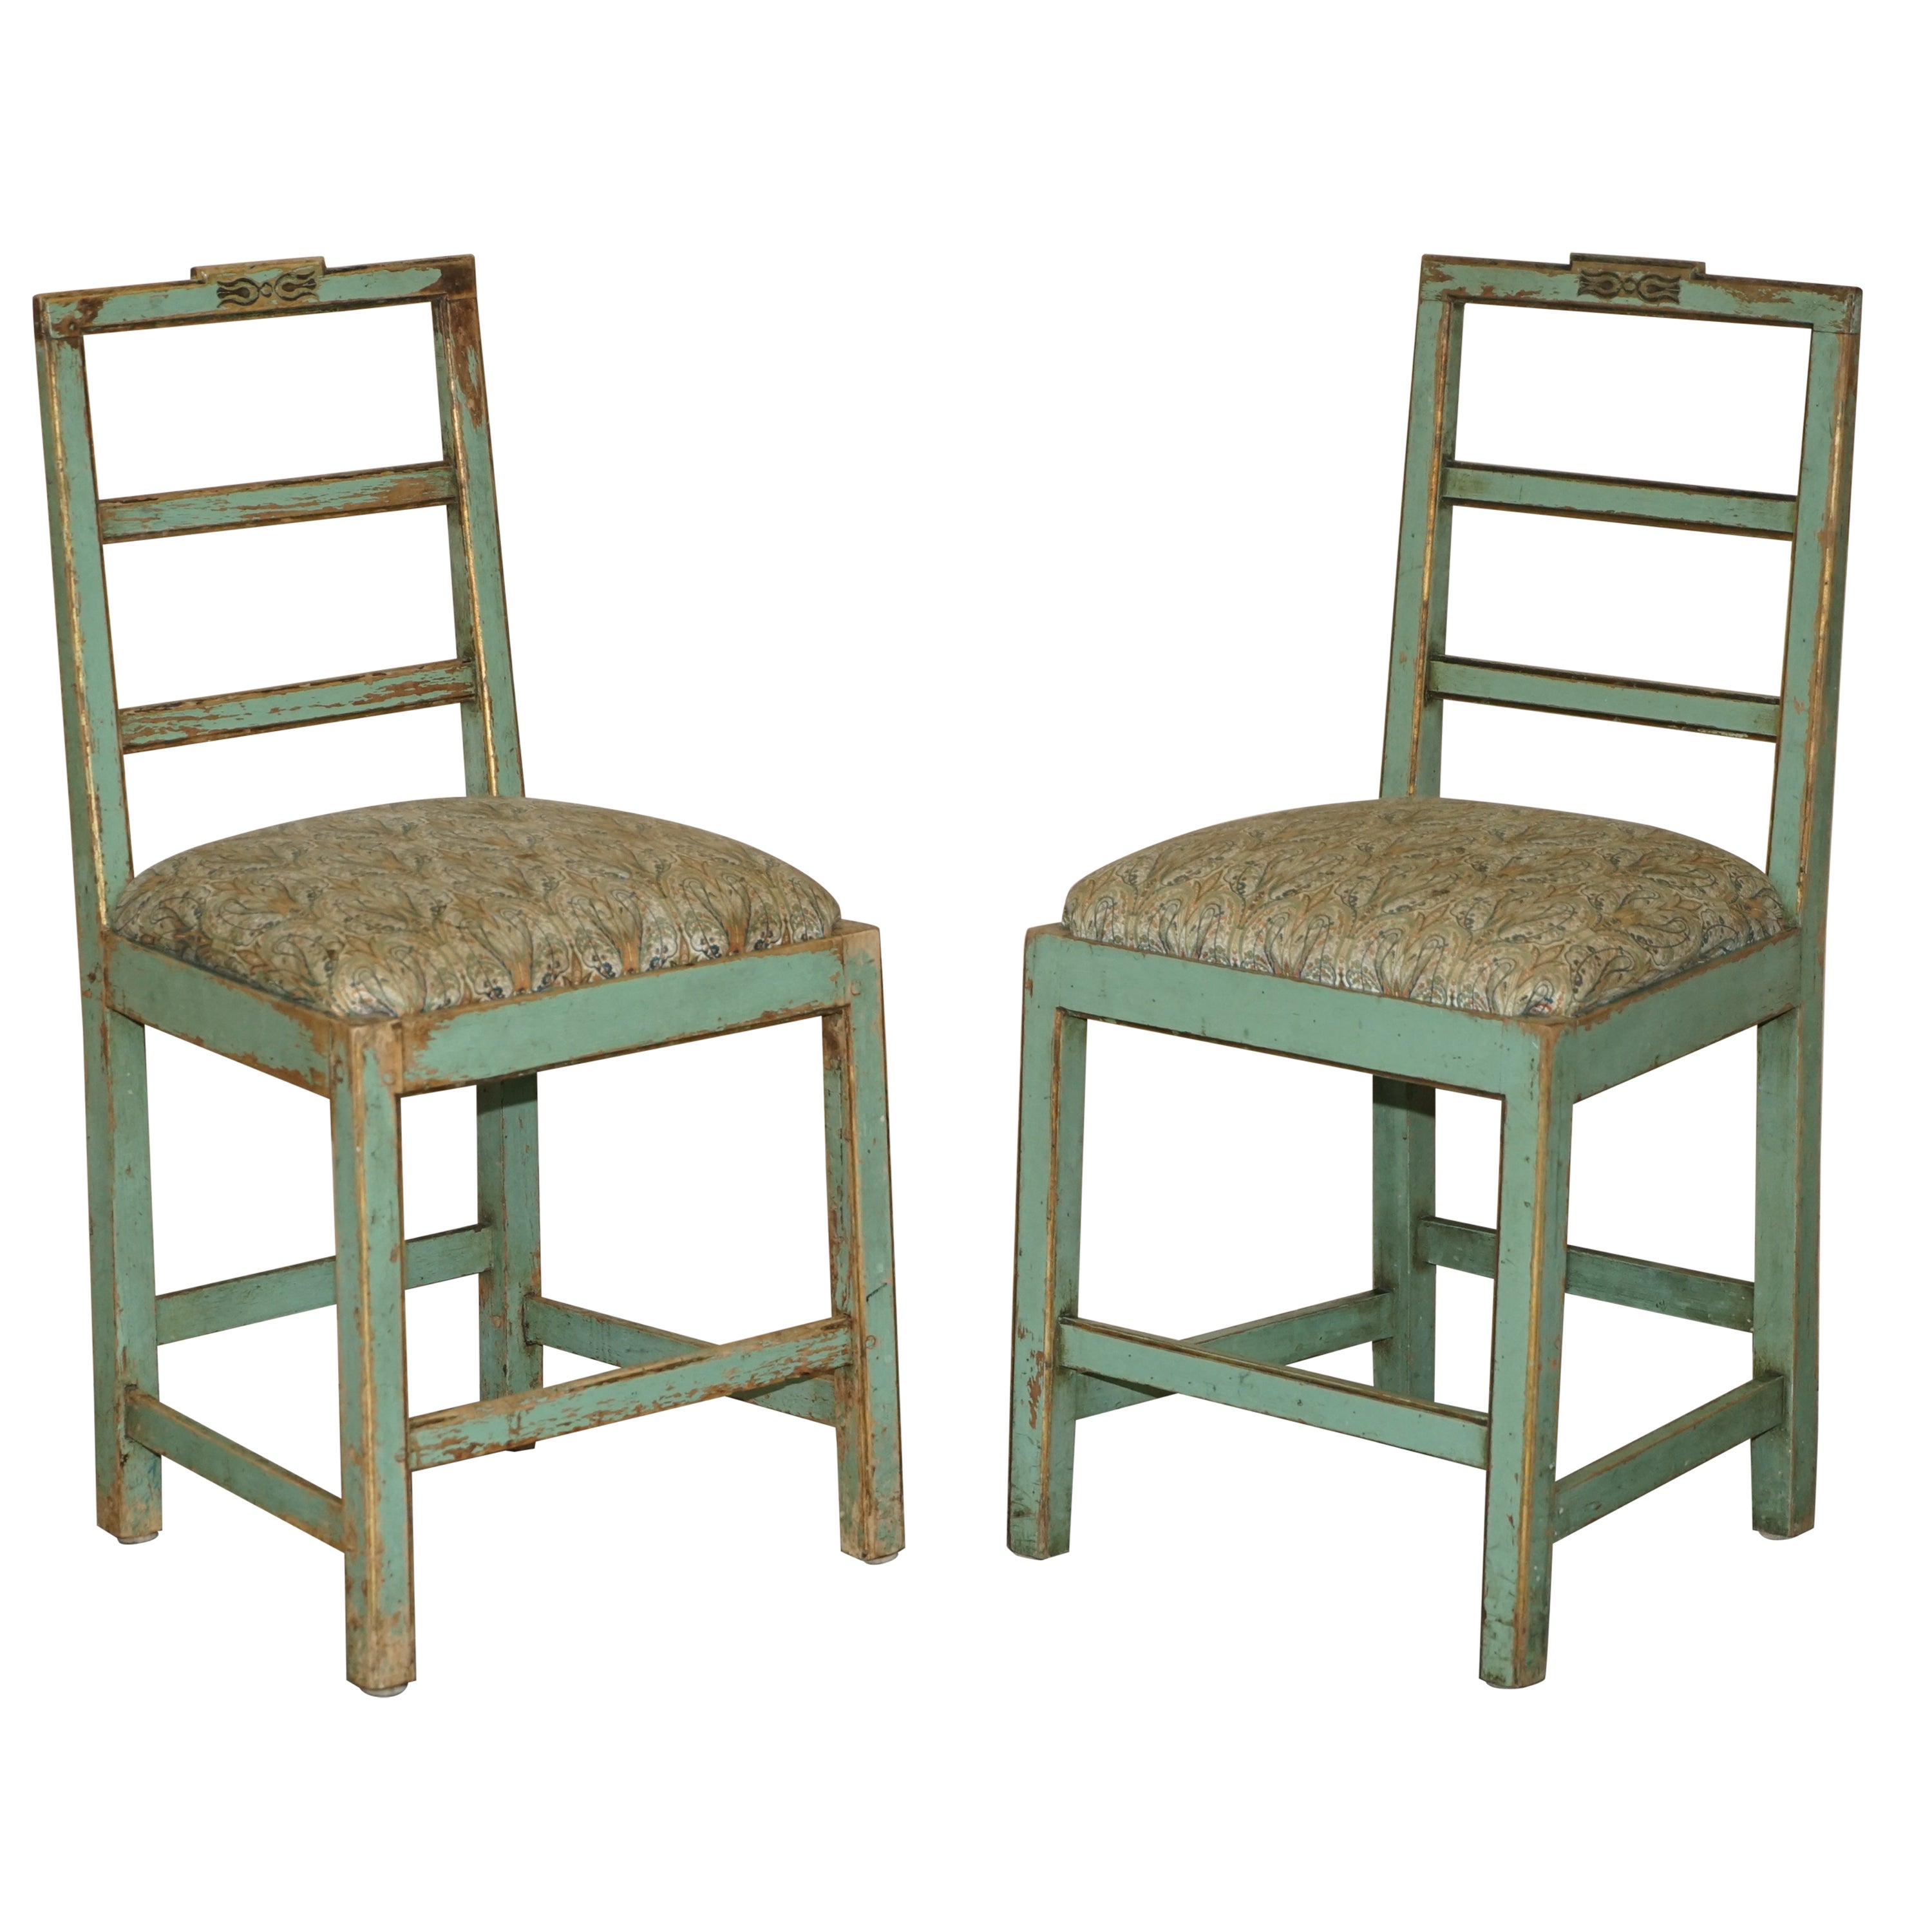 Pair of Antique Original Paint French Country Chairs Inc Liberty's London Fabric